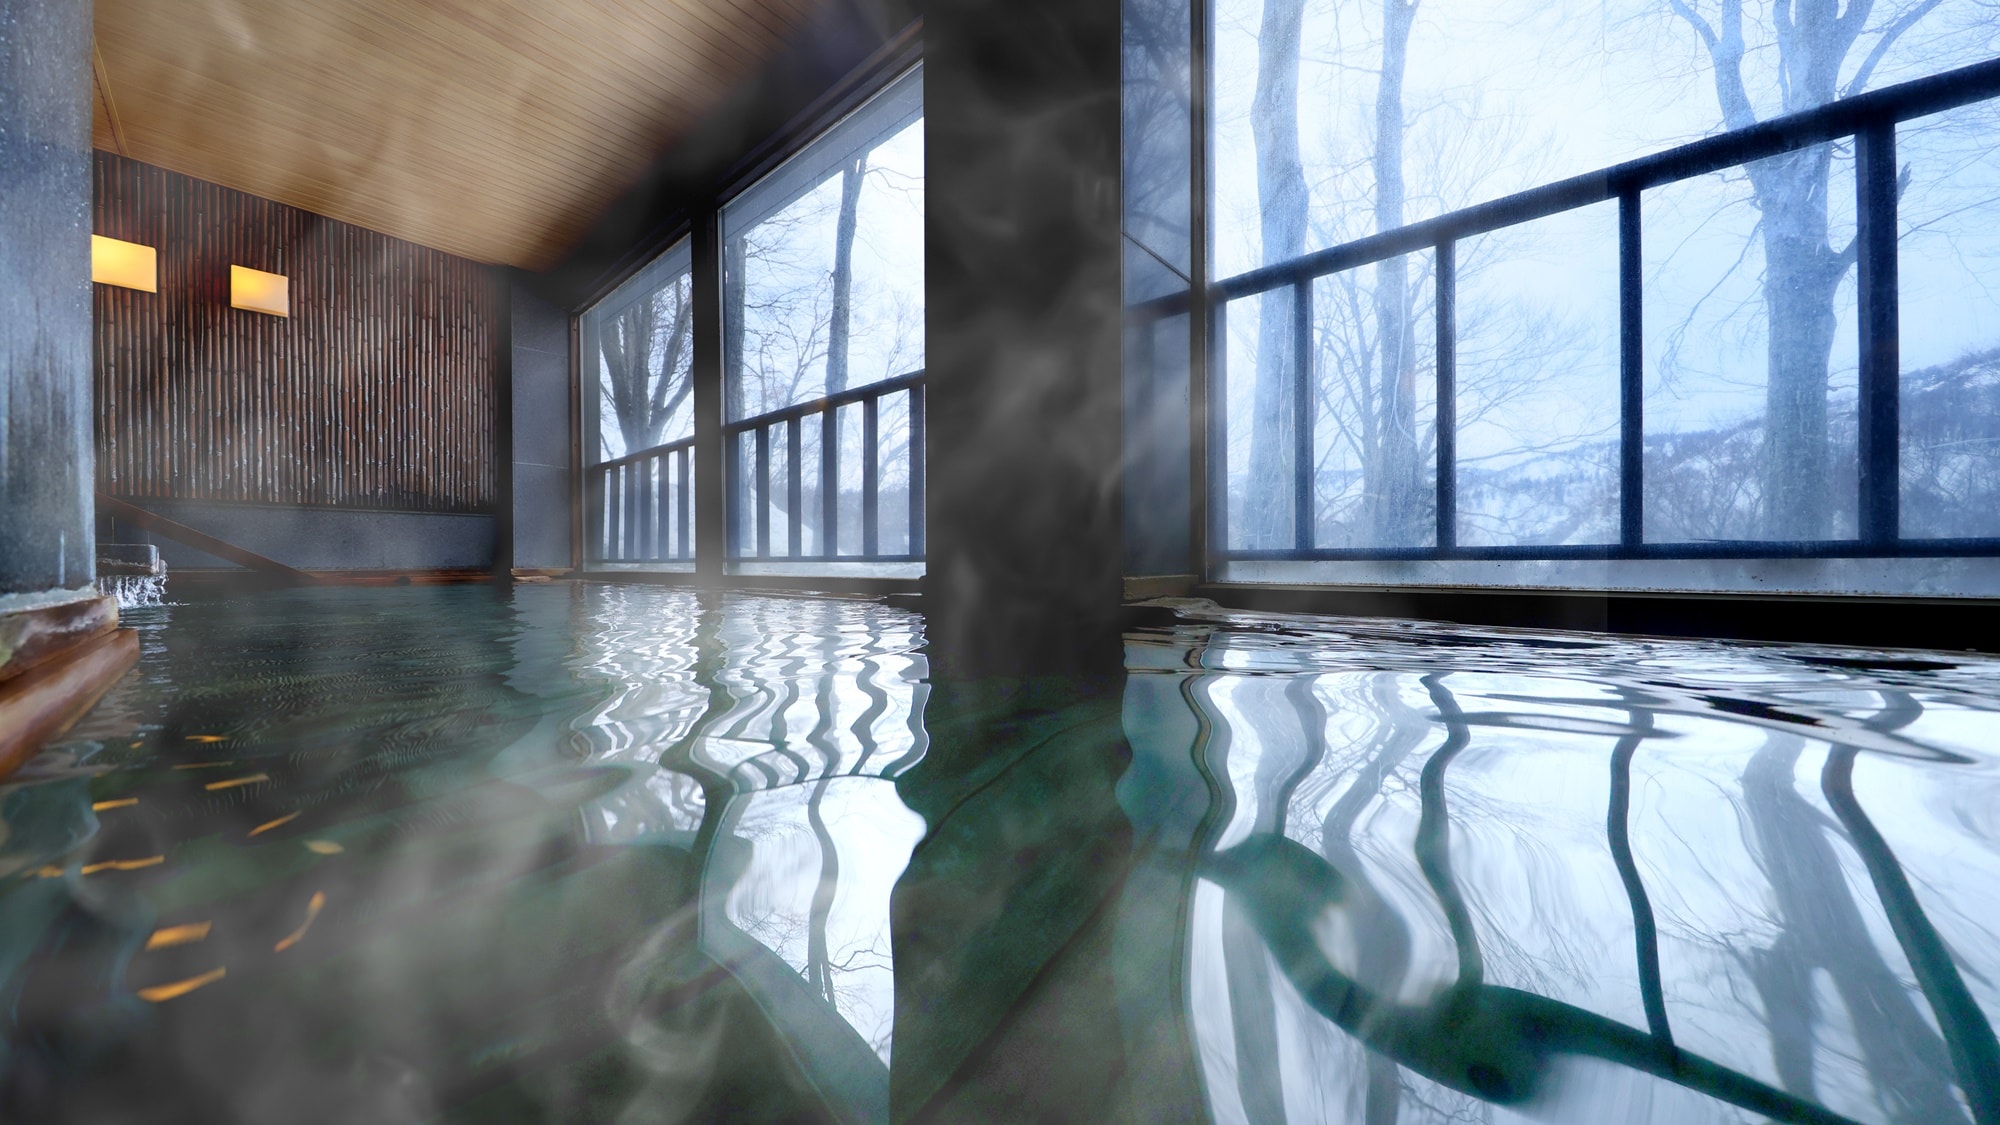 [Onsen] While watching the winter scenery of beech forests covered with snow.